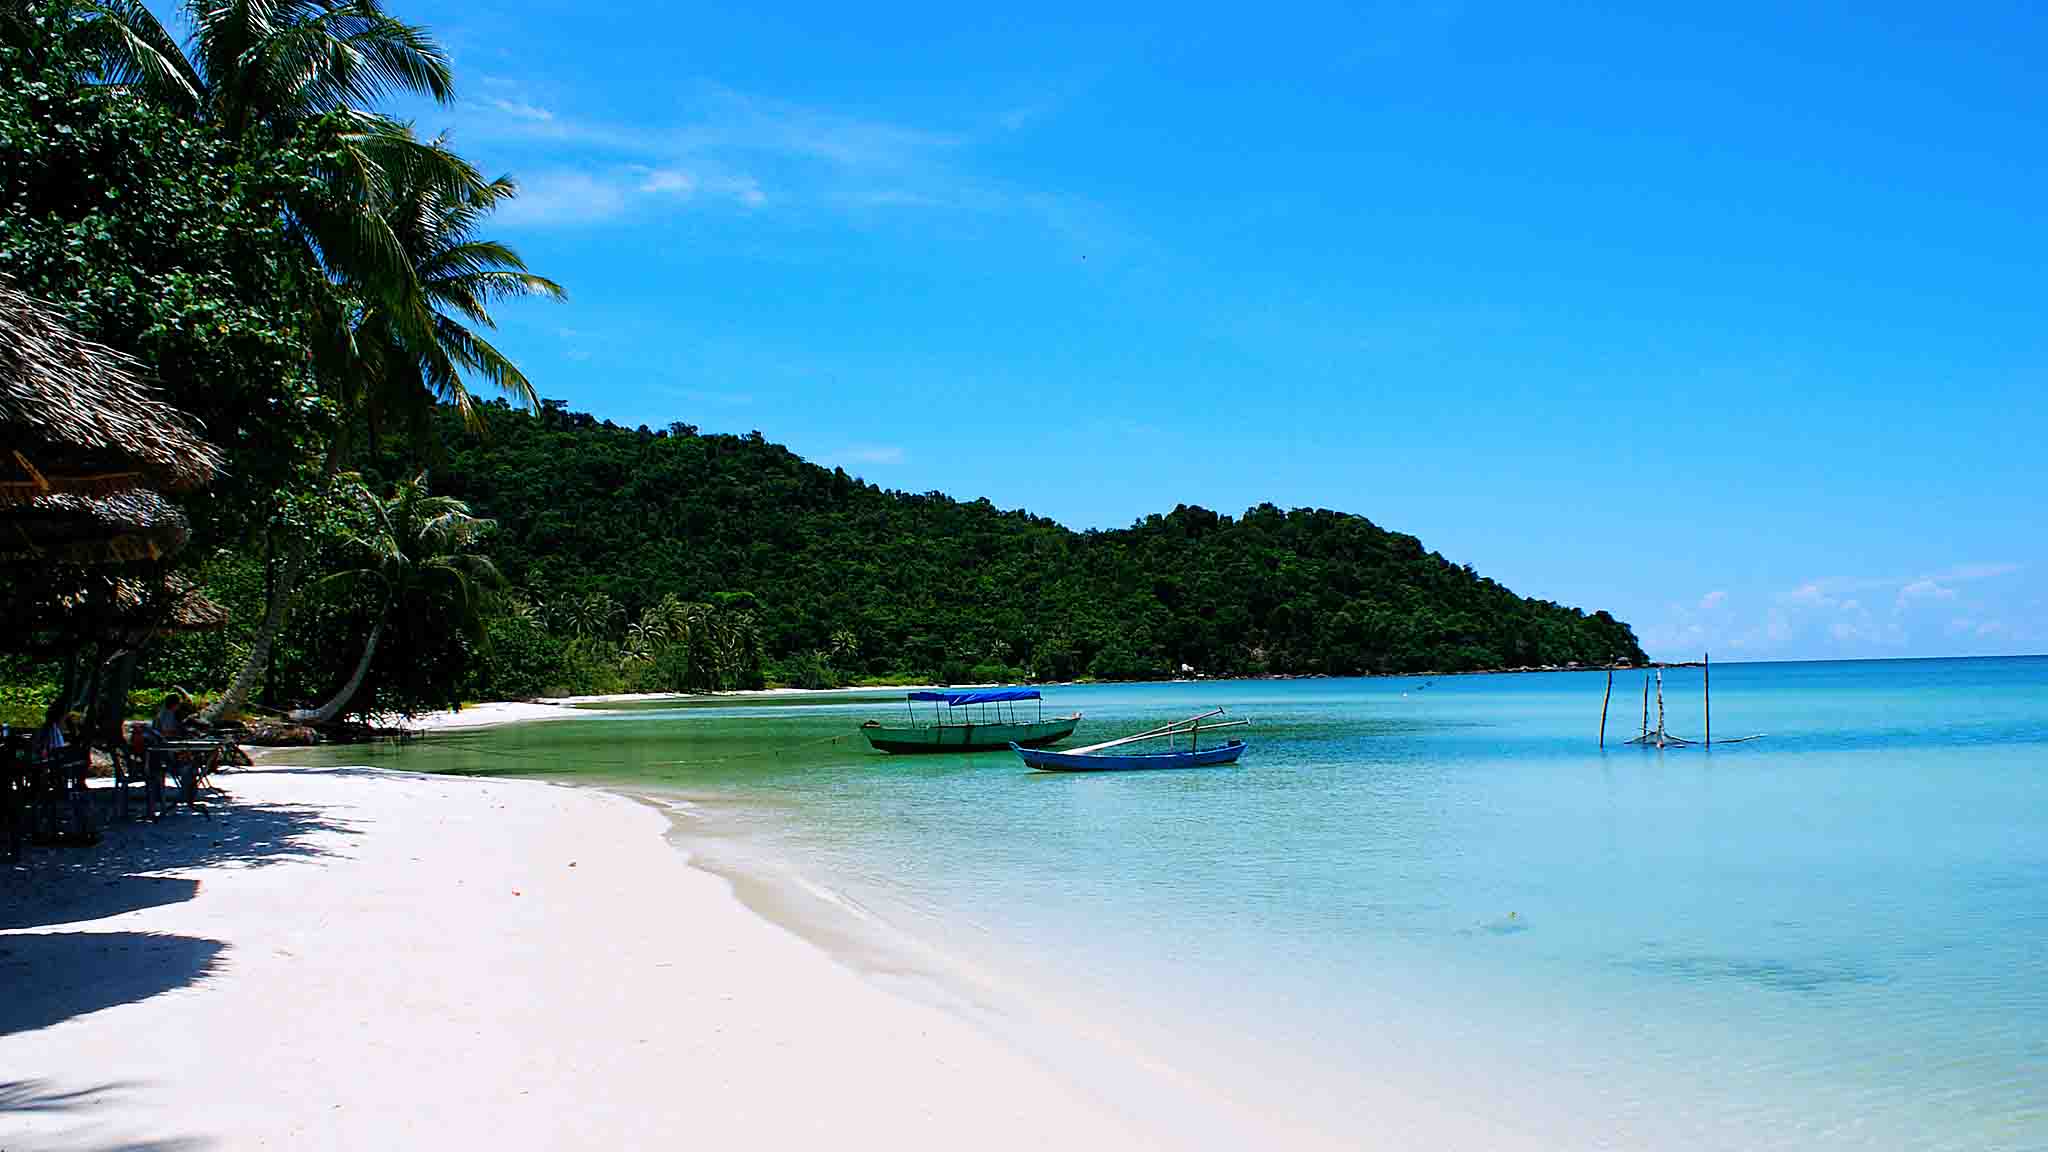 Excusion Tour to the South of Phu Quoc island